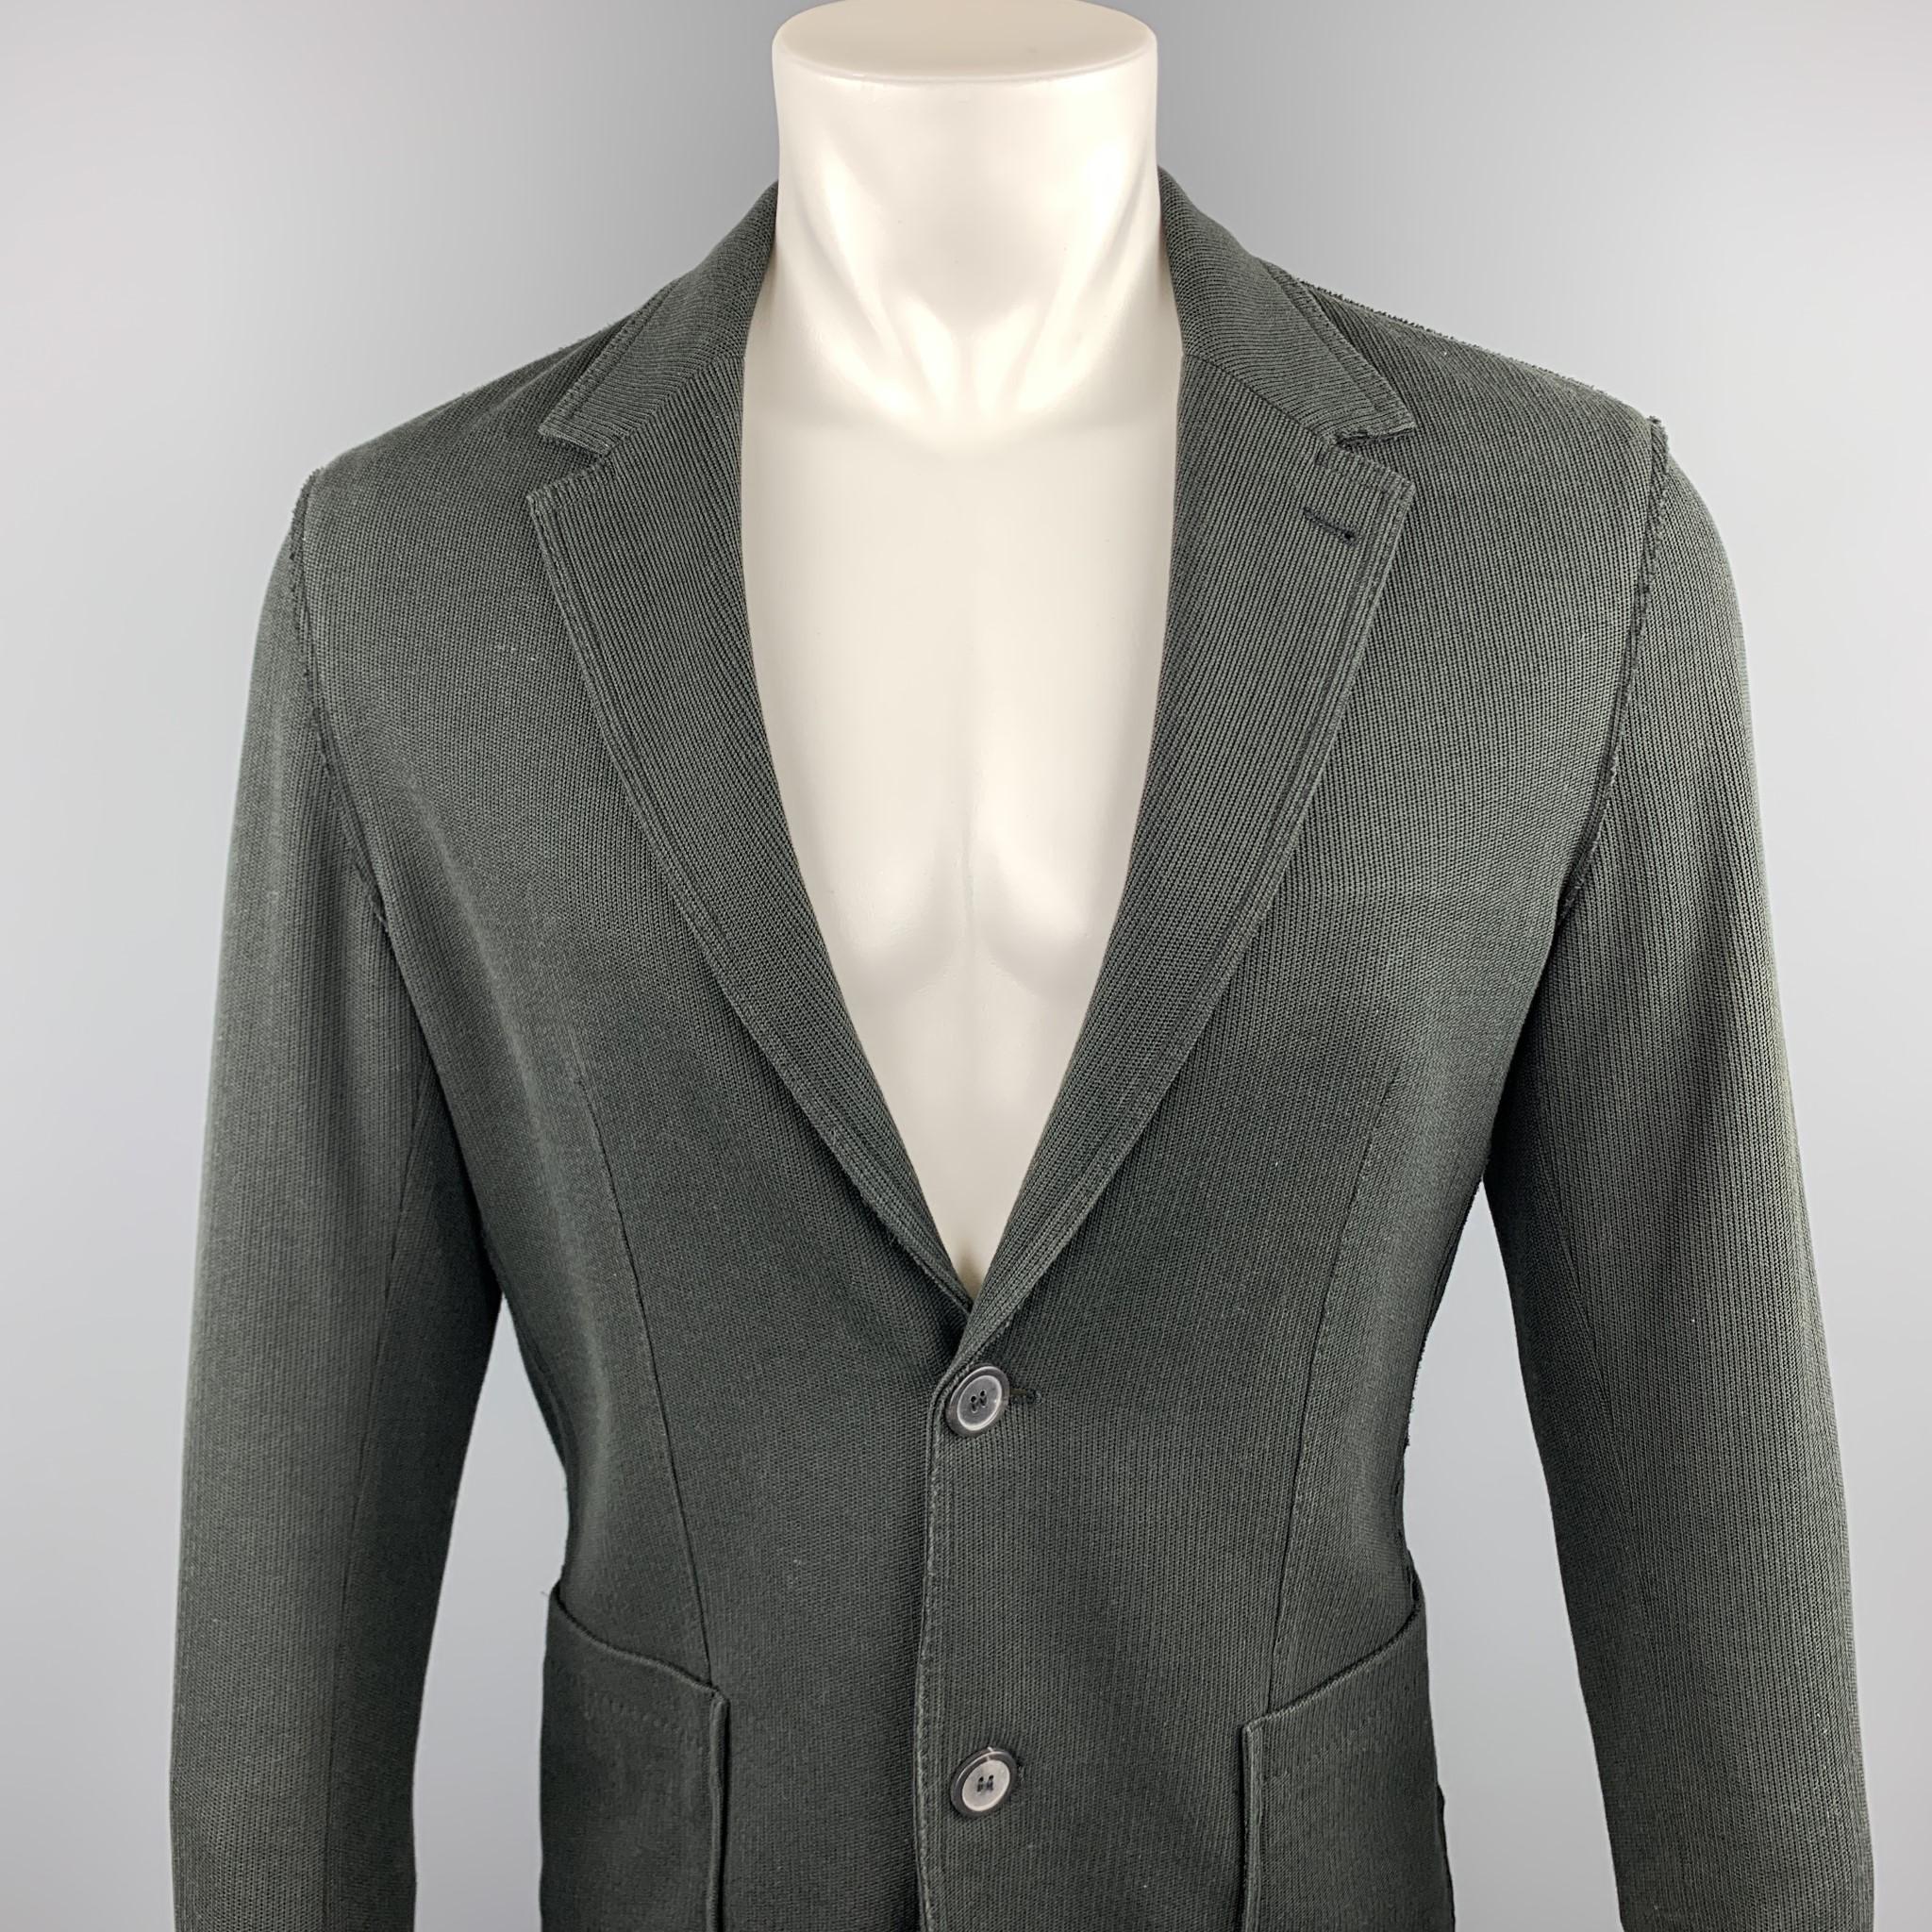 LANVIN sport coat comes in a charcoal woven cotton featuring a notch lapel, patch pockets, and a two button closure. Made in Romania. 

Very Good Pre-Owned Condition.
Marked: 48

Measurements:

Shoulder: 16.5 in. 
Chest: 38 in. 
Sleeve: 26 in.